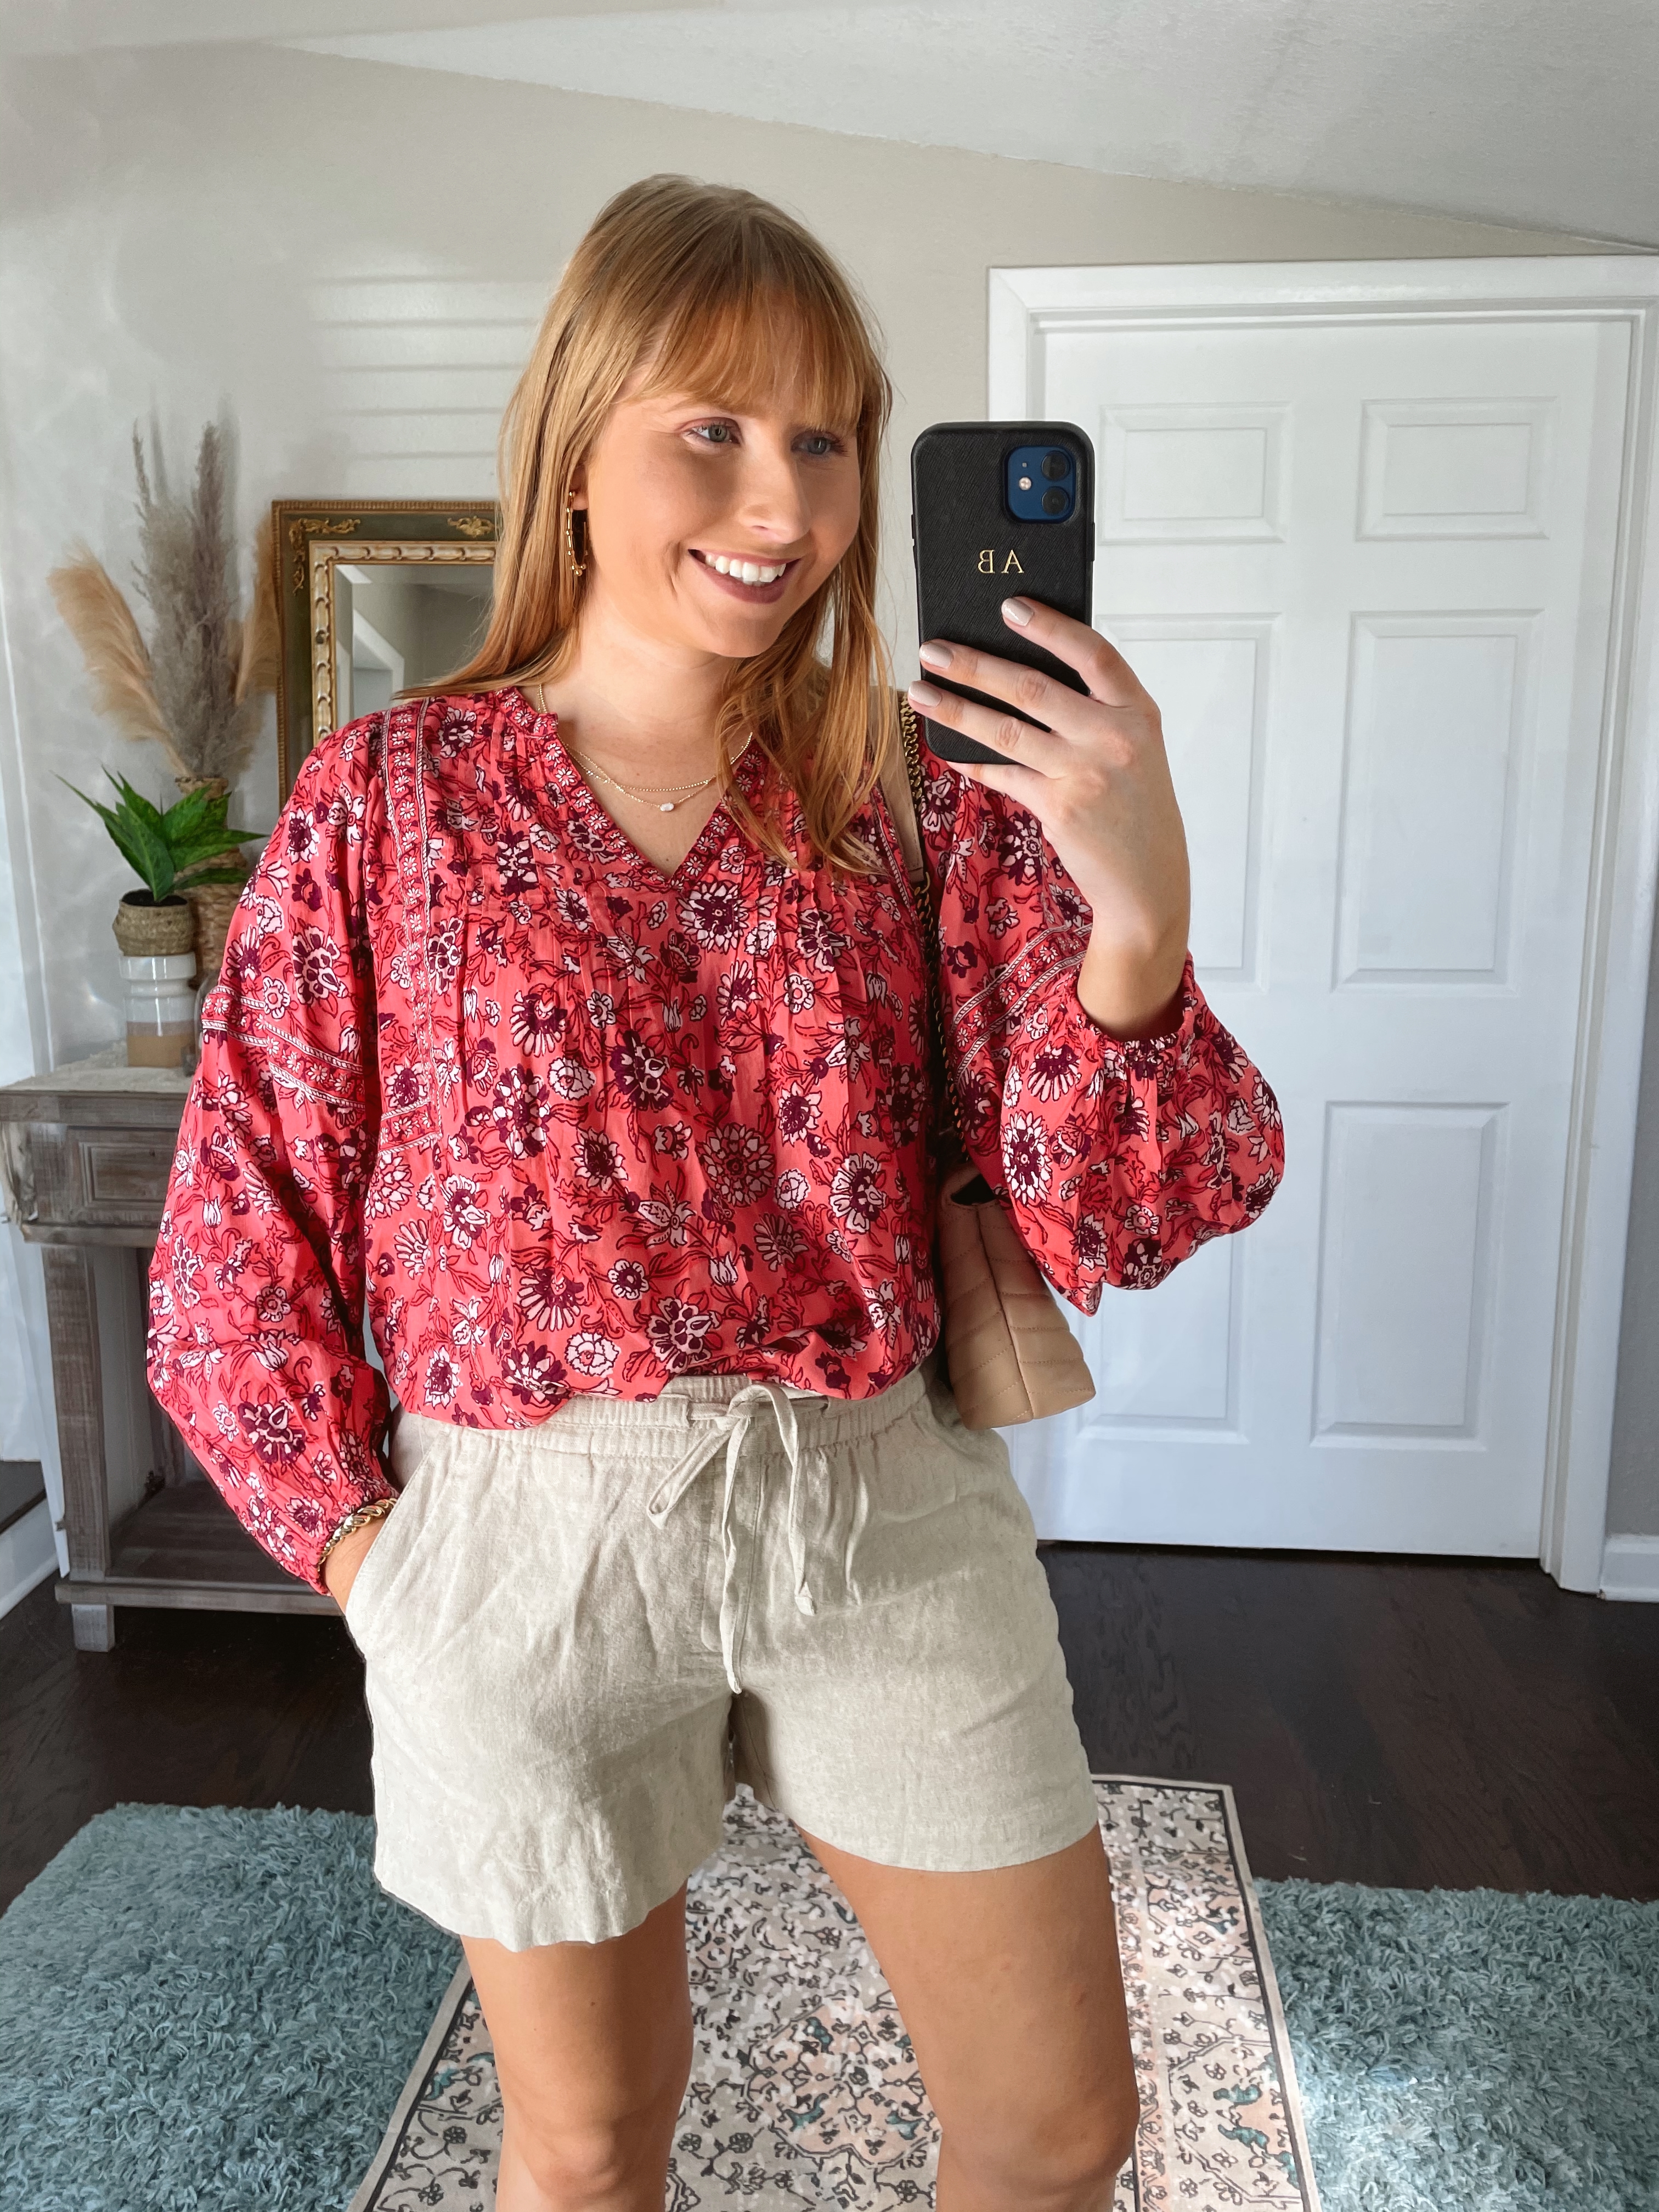 Best Clothes for Hot Weather and Humidity - Summer Outfit Ideas 2021